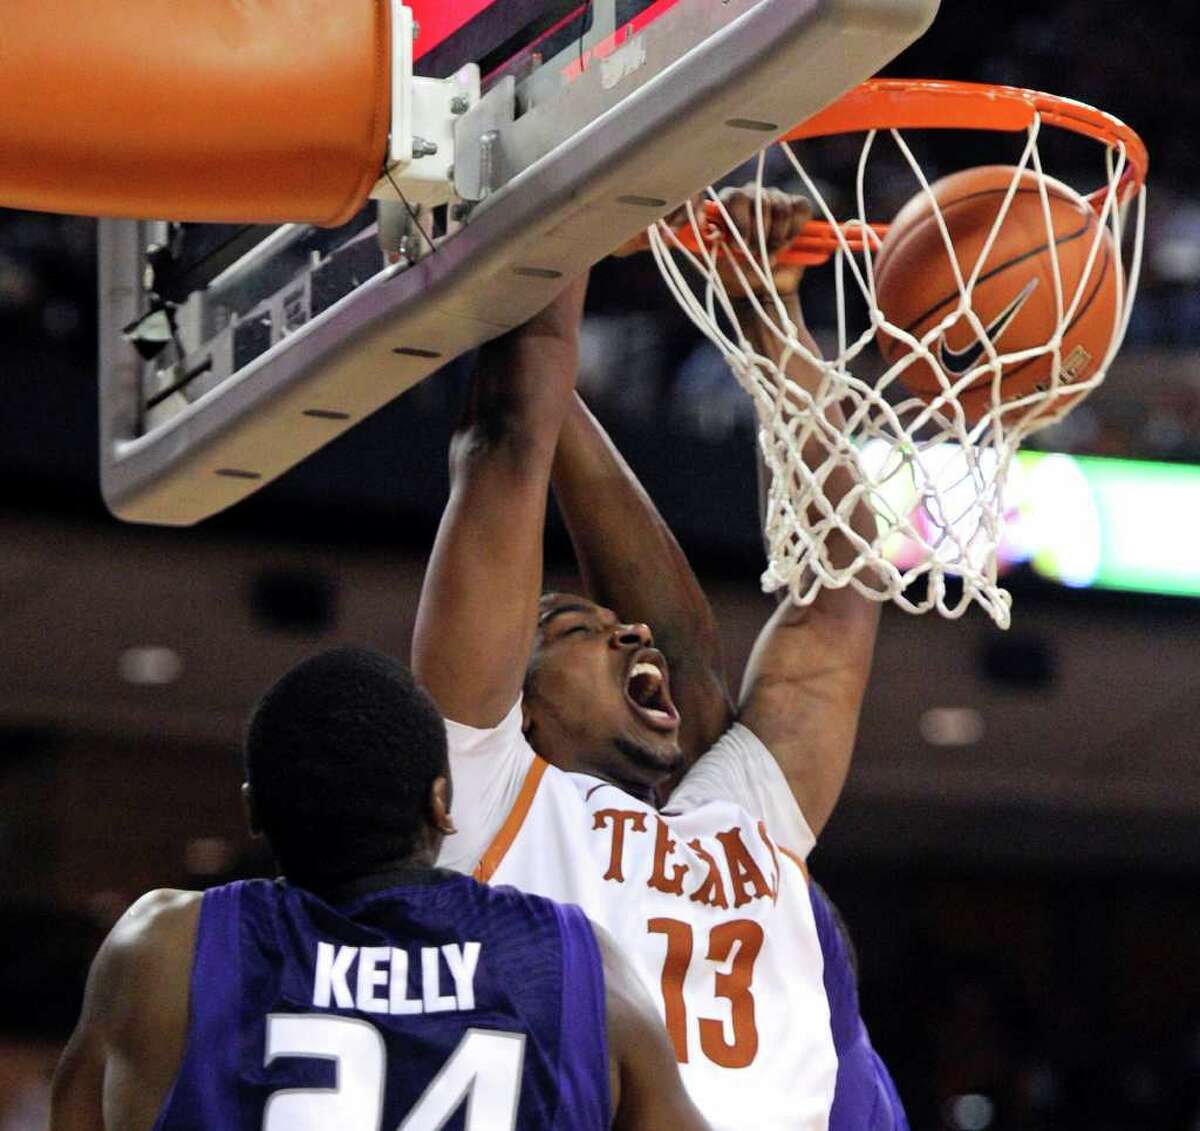 Texas forward Tristan Thompson (center) dunks the ball against Kansas State forward Curtis Kelly (front) and center Jordan Henriquez-Roberts (rear) during the first half on Monday, Feb. 28, 2011, in Austin.